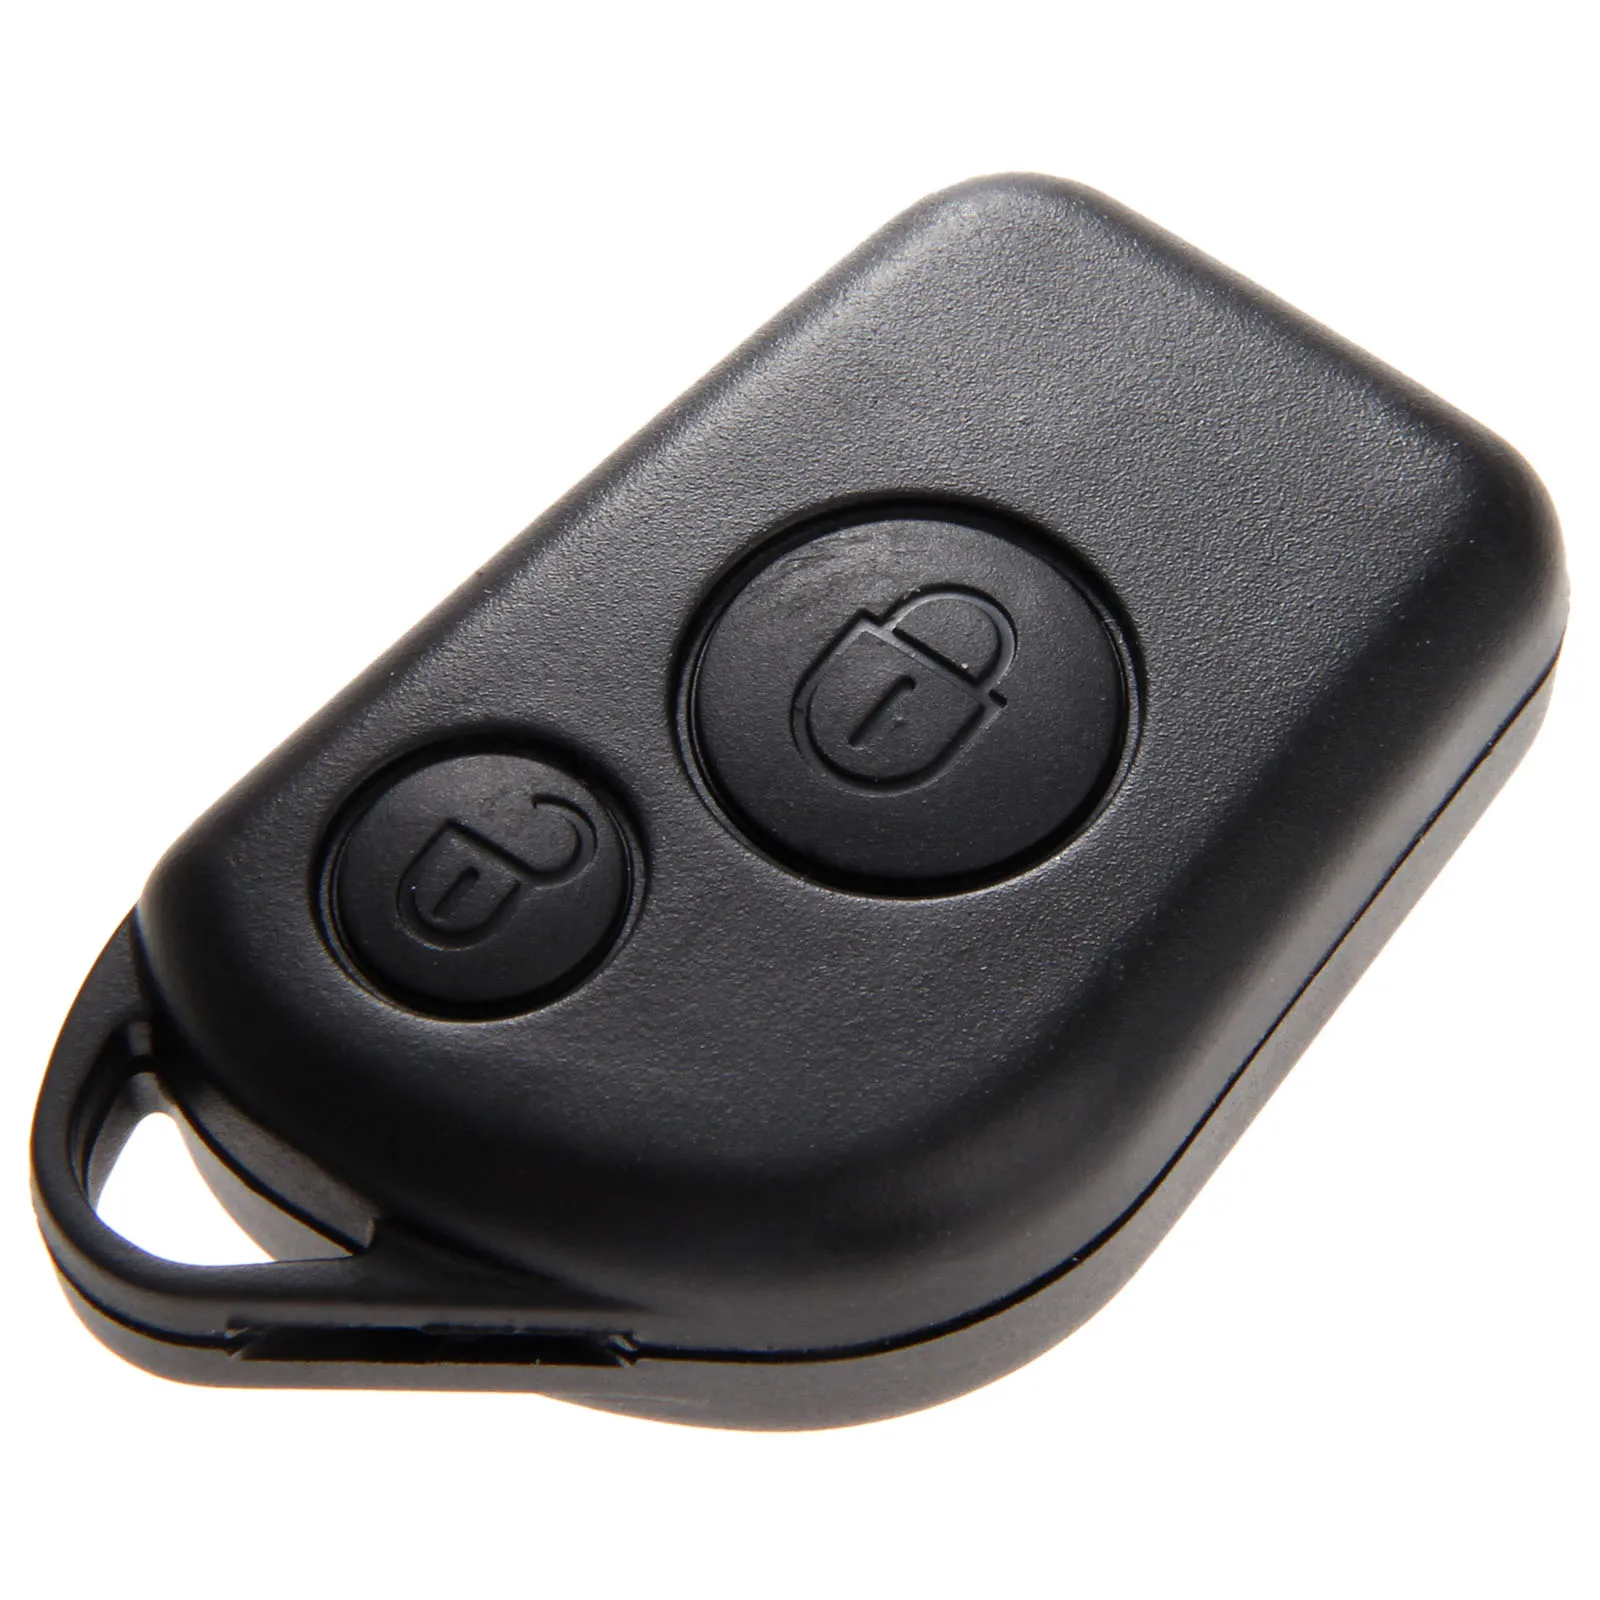 2 Buttons Remote Key Fob Case Shell Fit For Citroen Saxo Berlingo Picasso Xsara Peugeot 306 307 406 Replacement Car Covers mgoodoo 2 buttons car remote key fob case shell for citroen saxo berlingo picasso xsara peugeot 306 307 406 replace car covers